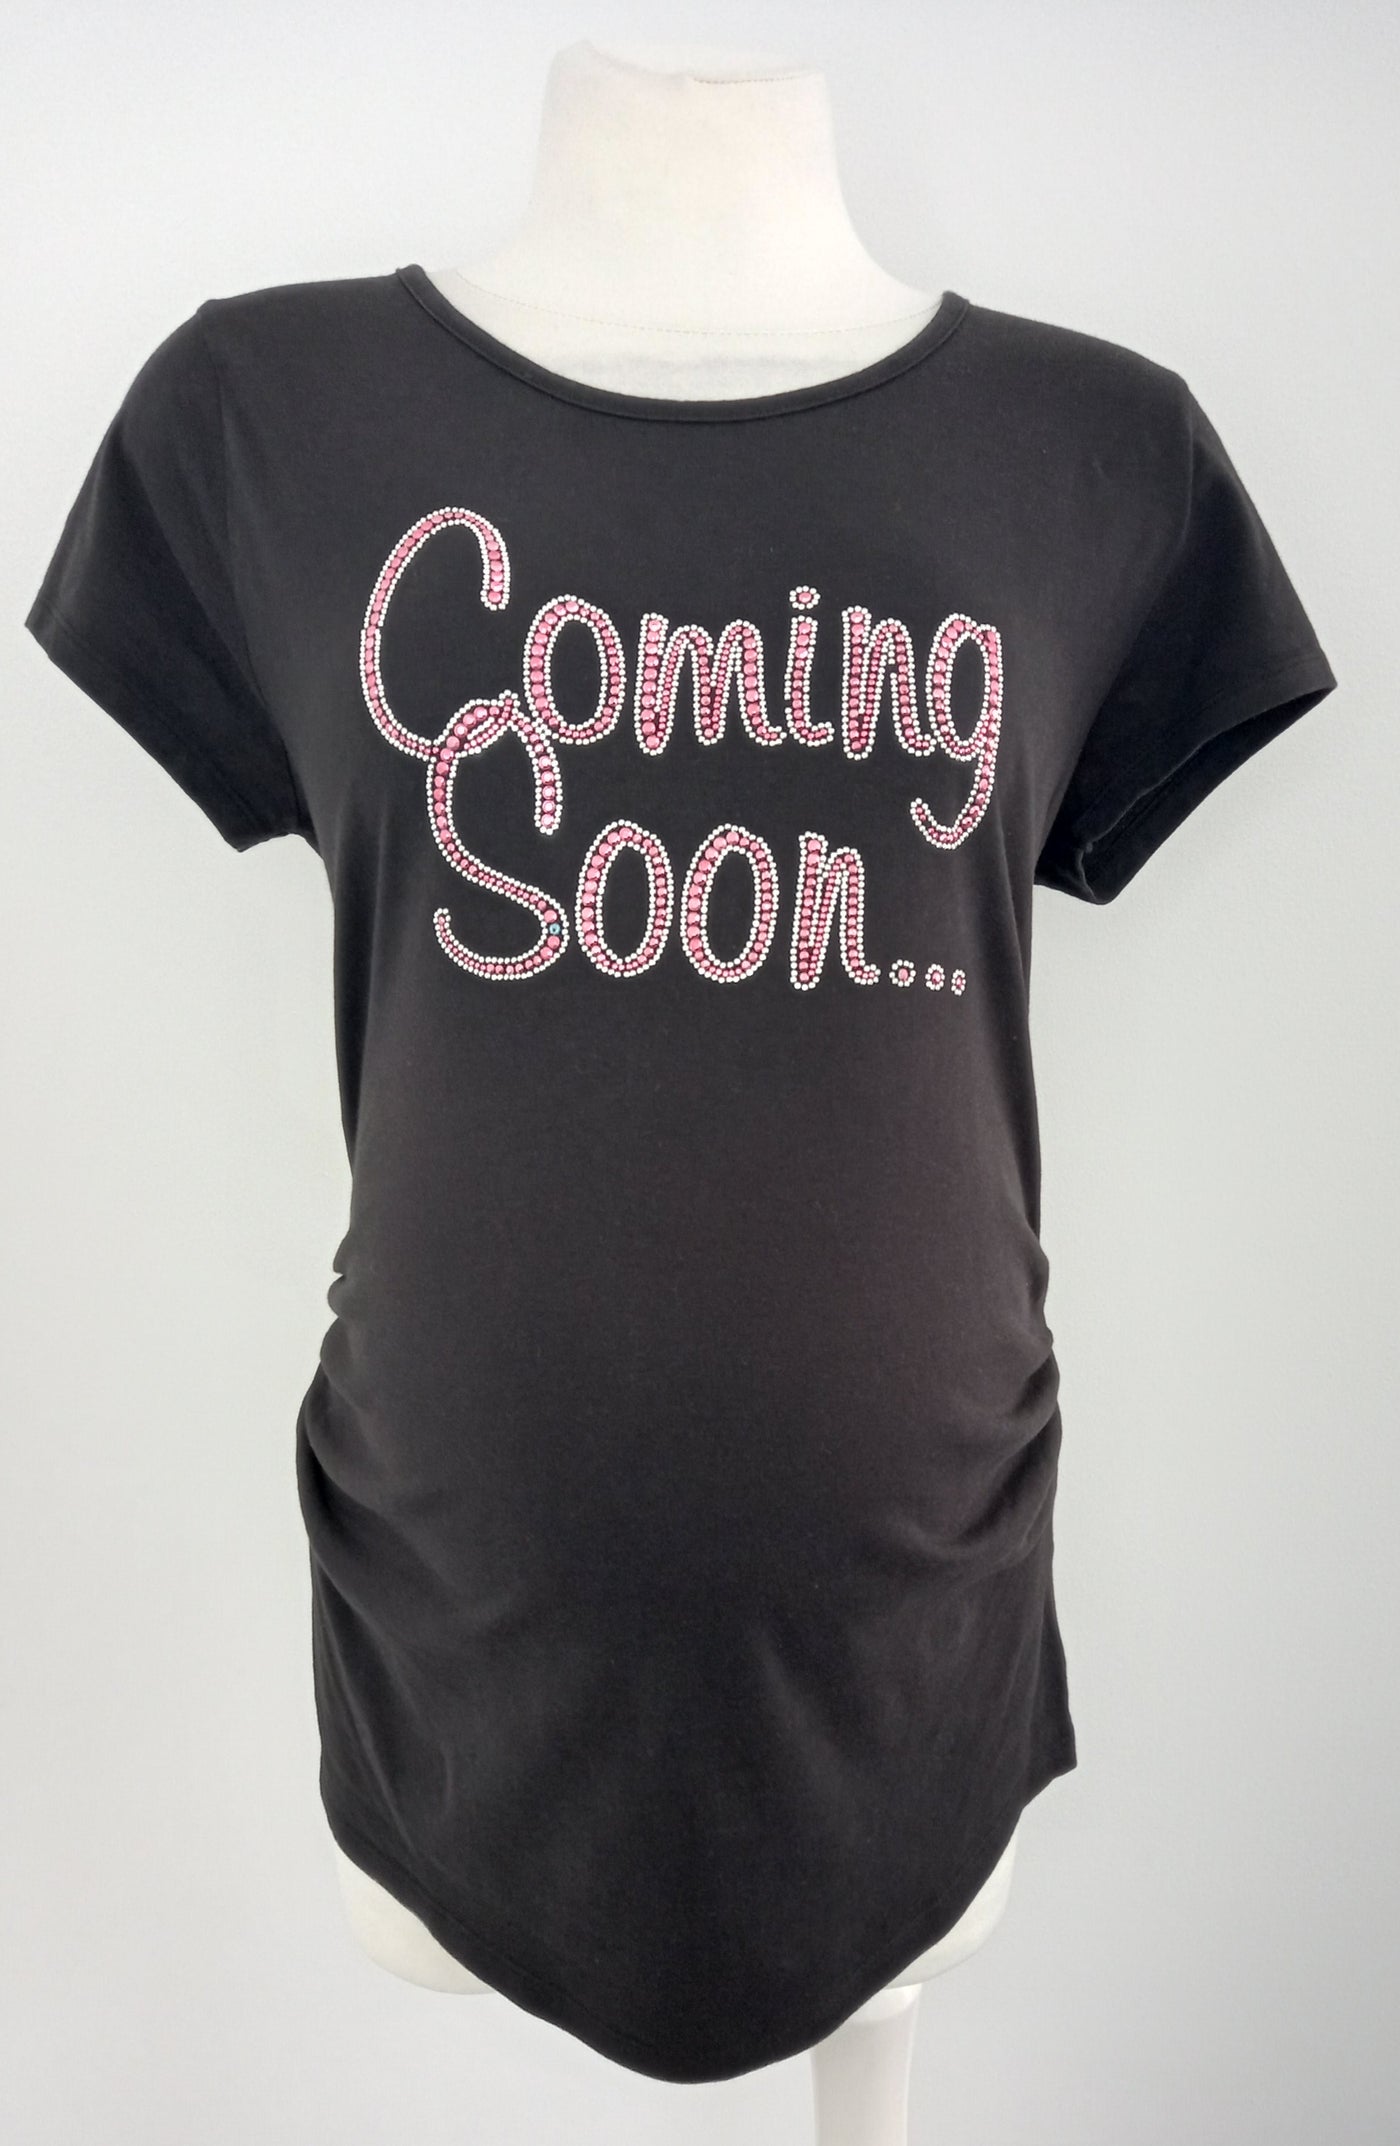 New Look Maternity Black 'Coming Soon' Diamante T-Shirt - Size 16 (more like 10/12)